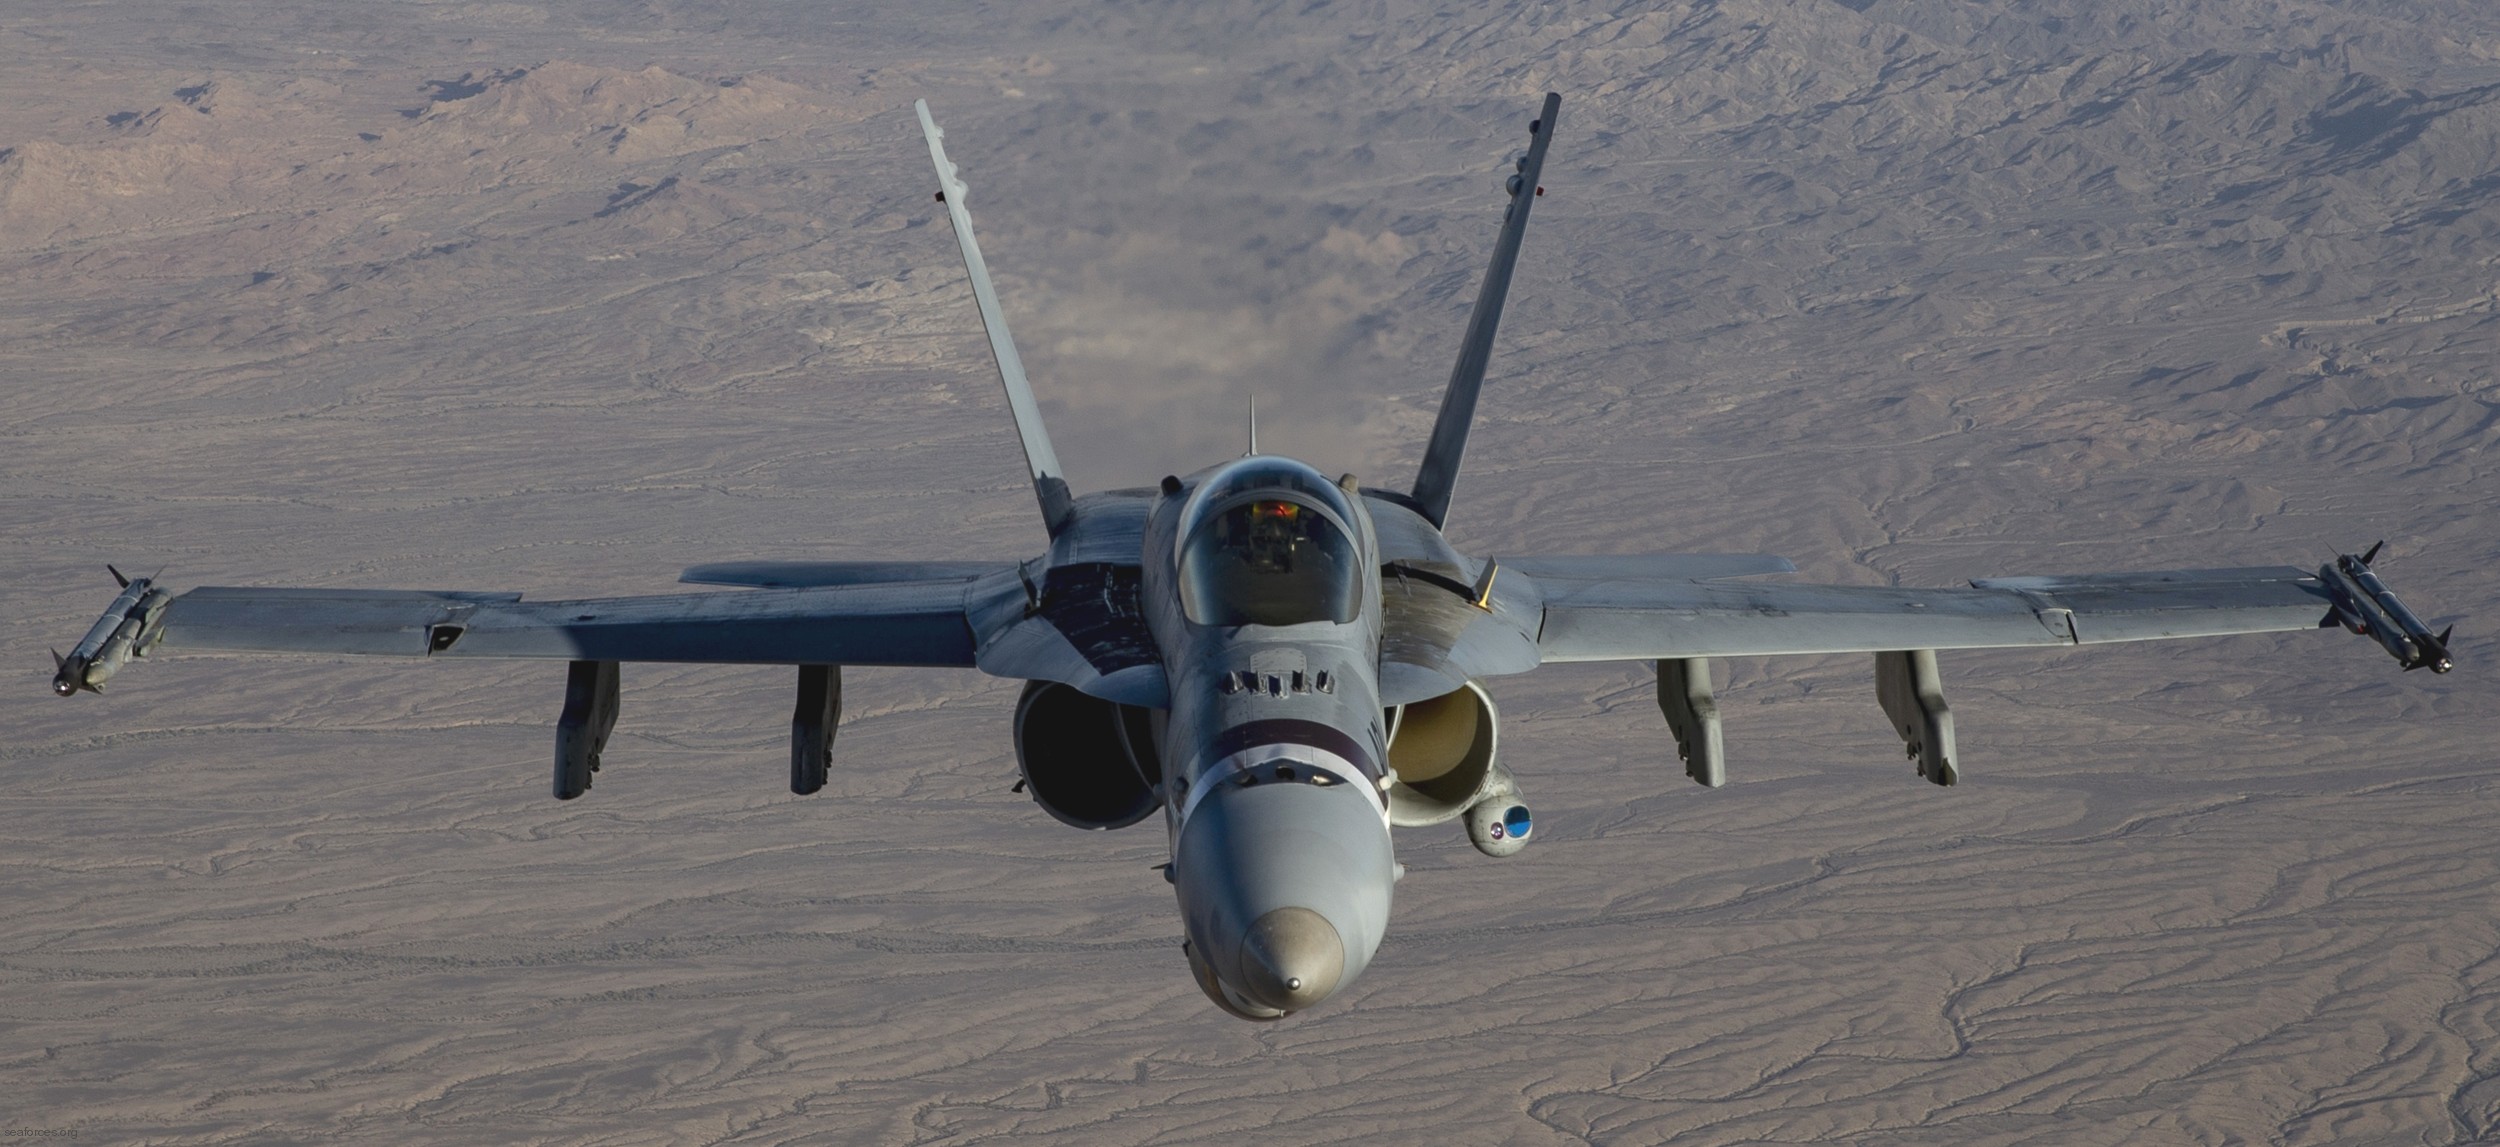 vmfa-323 death rattlers marine fighter attack squadron f/a-18c hornet 34